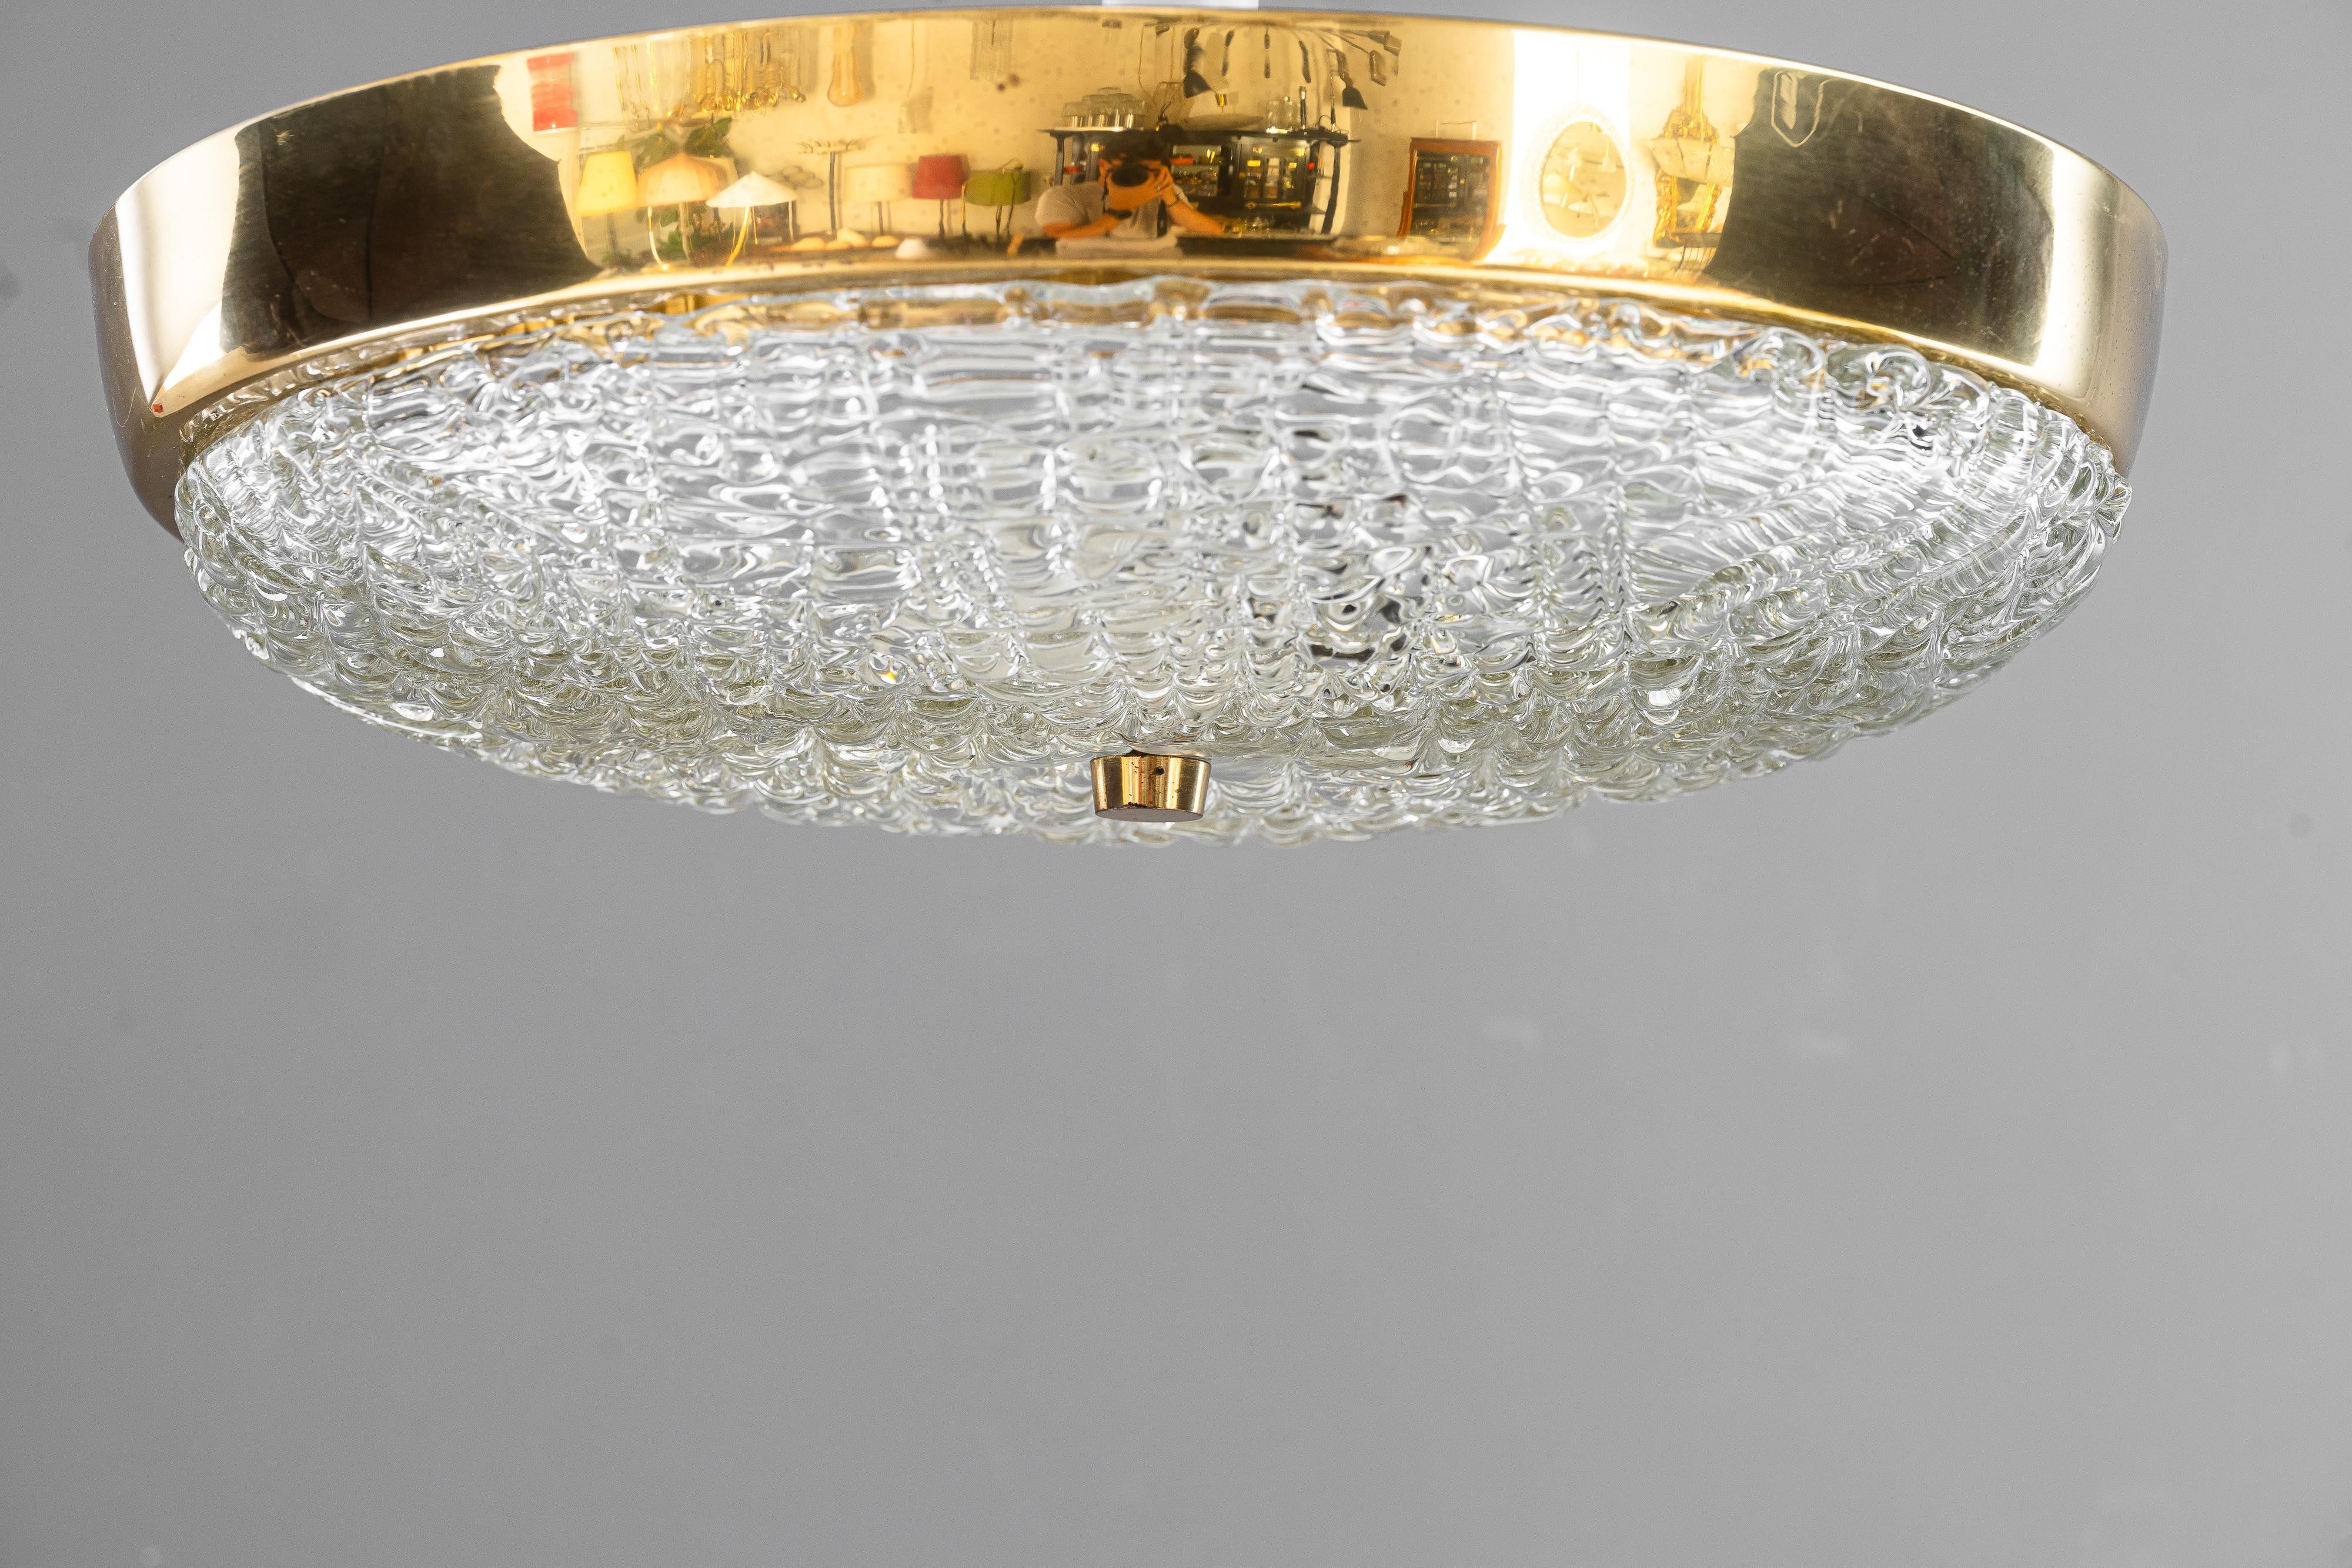 2 Kalmar ceiling lamps with structure glass vienna around 1920s
Brass polished and stove enameled
Original glass shades